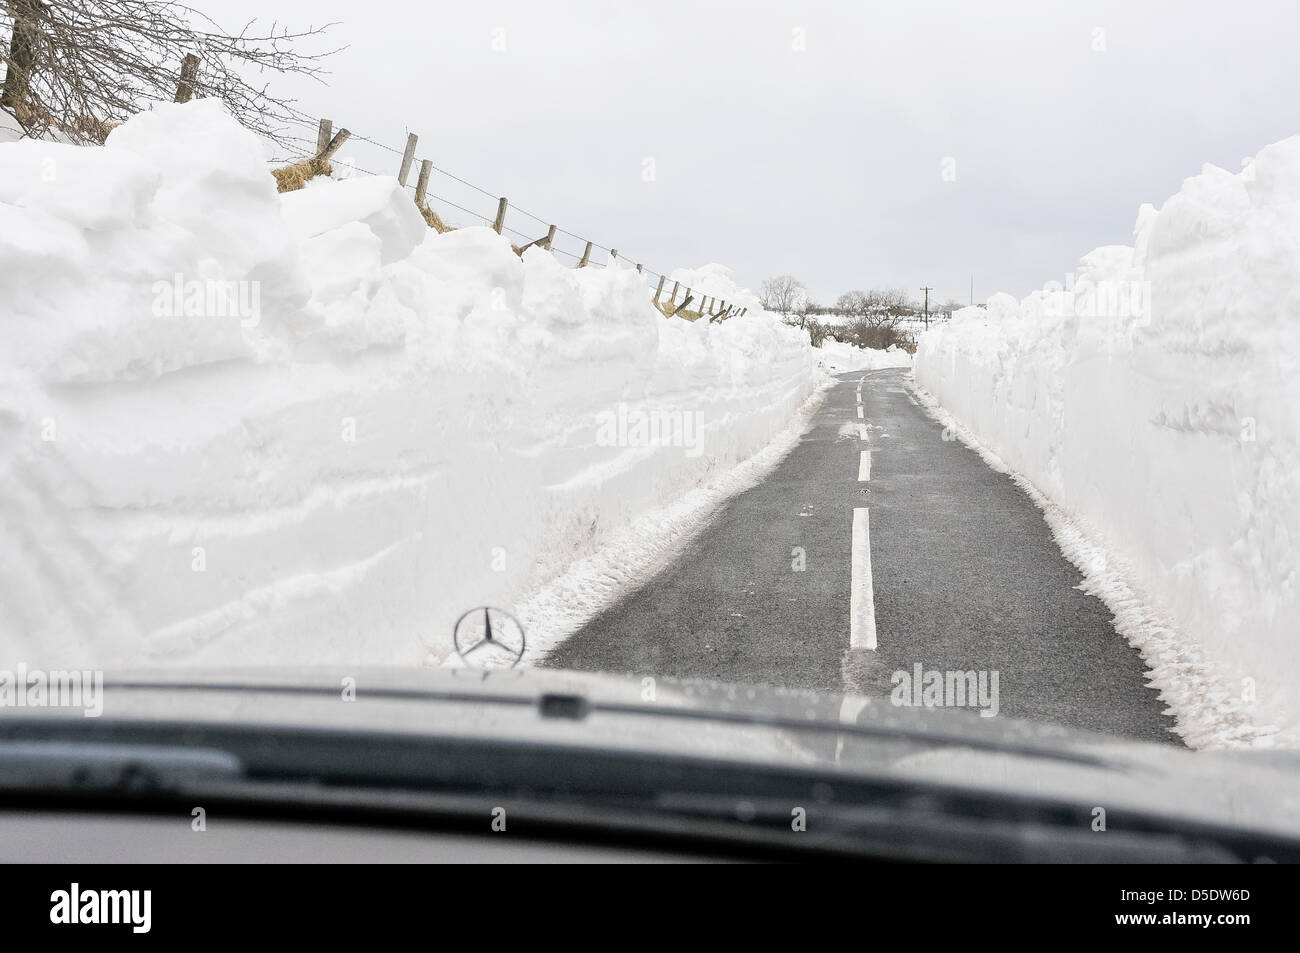 Carrickfergus, Northern Ireland. 29th March, 2013. A Mercedes car drives between deep walls of snow which line a recently cleared rural road Stock Photo